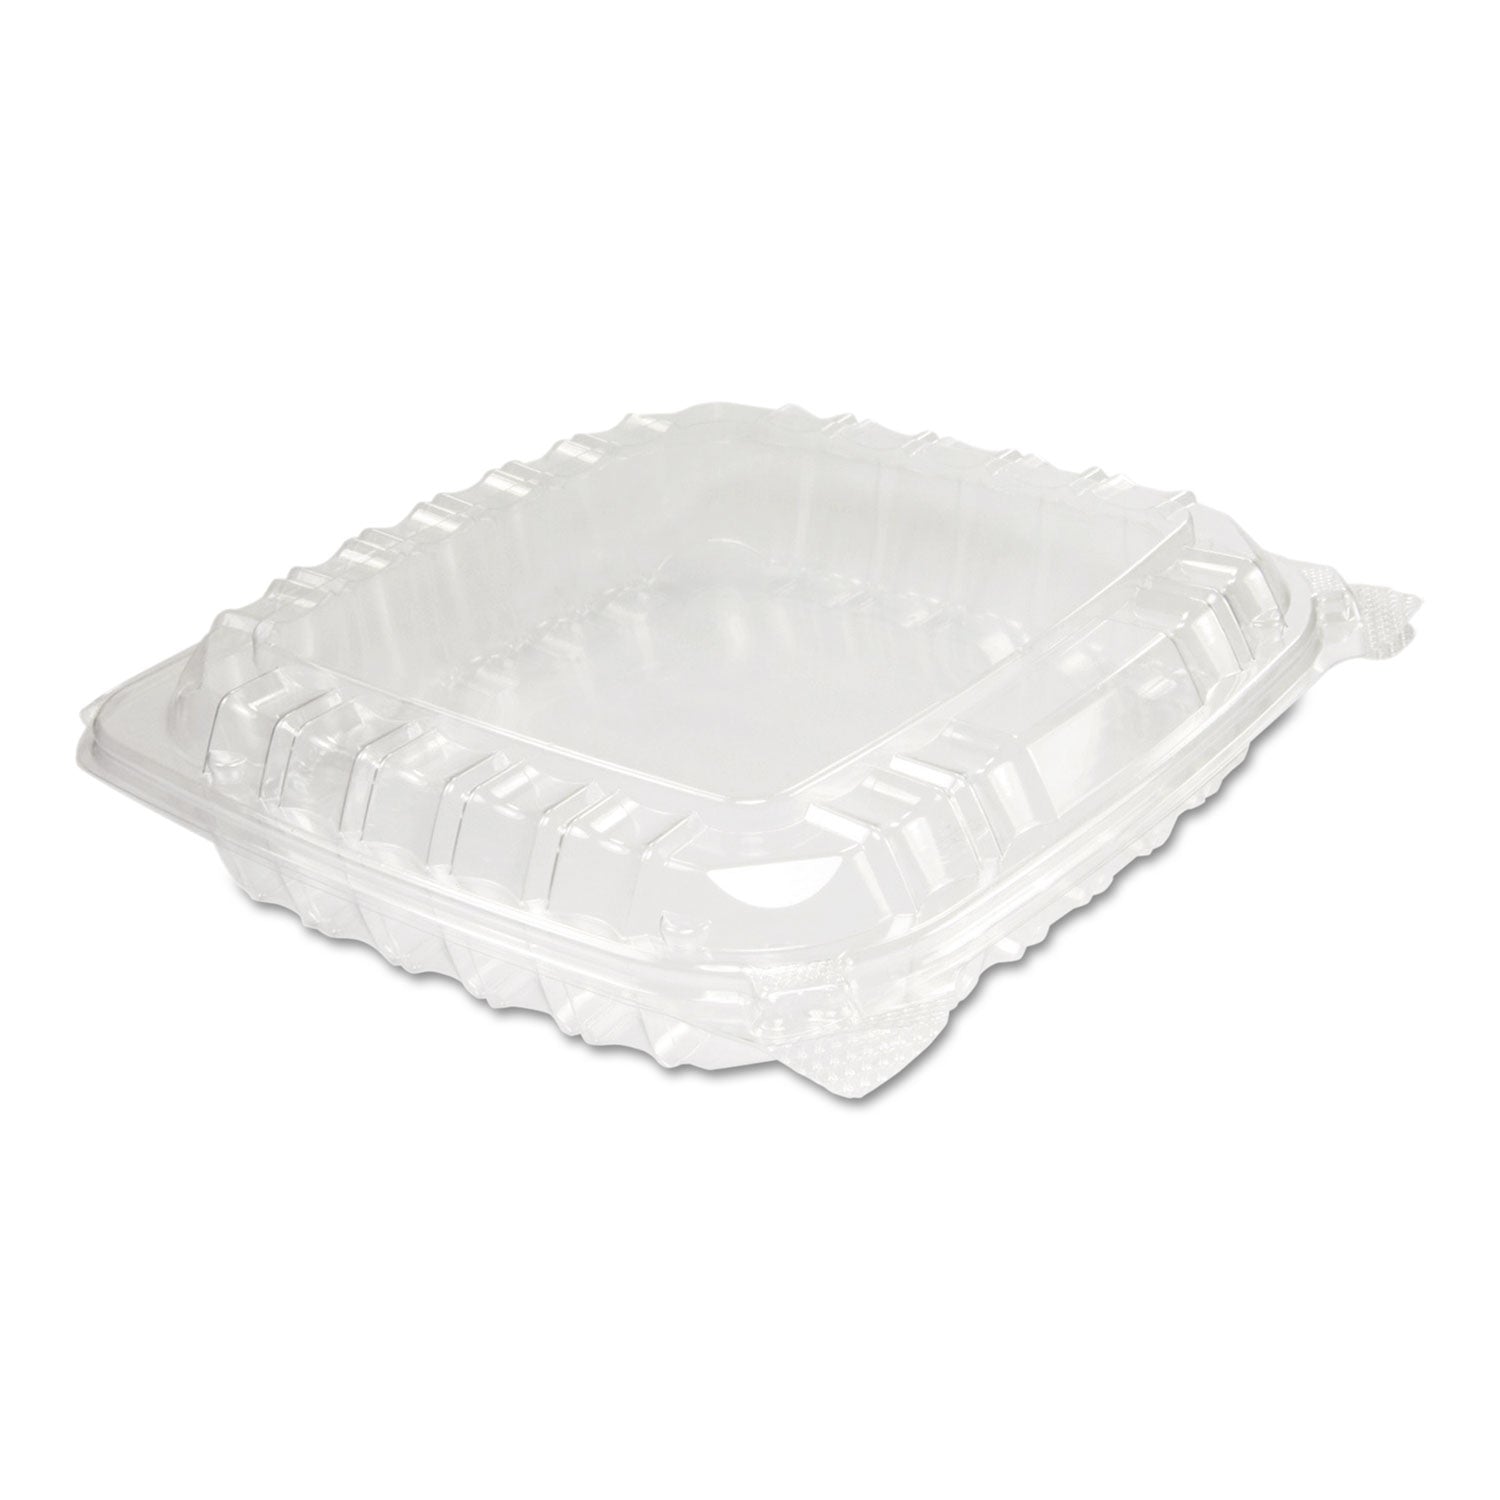 ClearSeal Hinged-Lid Plastic Containers, 8.31 x 8.31 x 2, Clear, Plastic, 125/Bag, 2 Bags/Carton - 